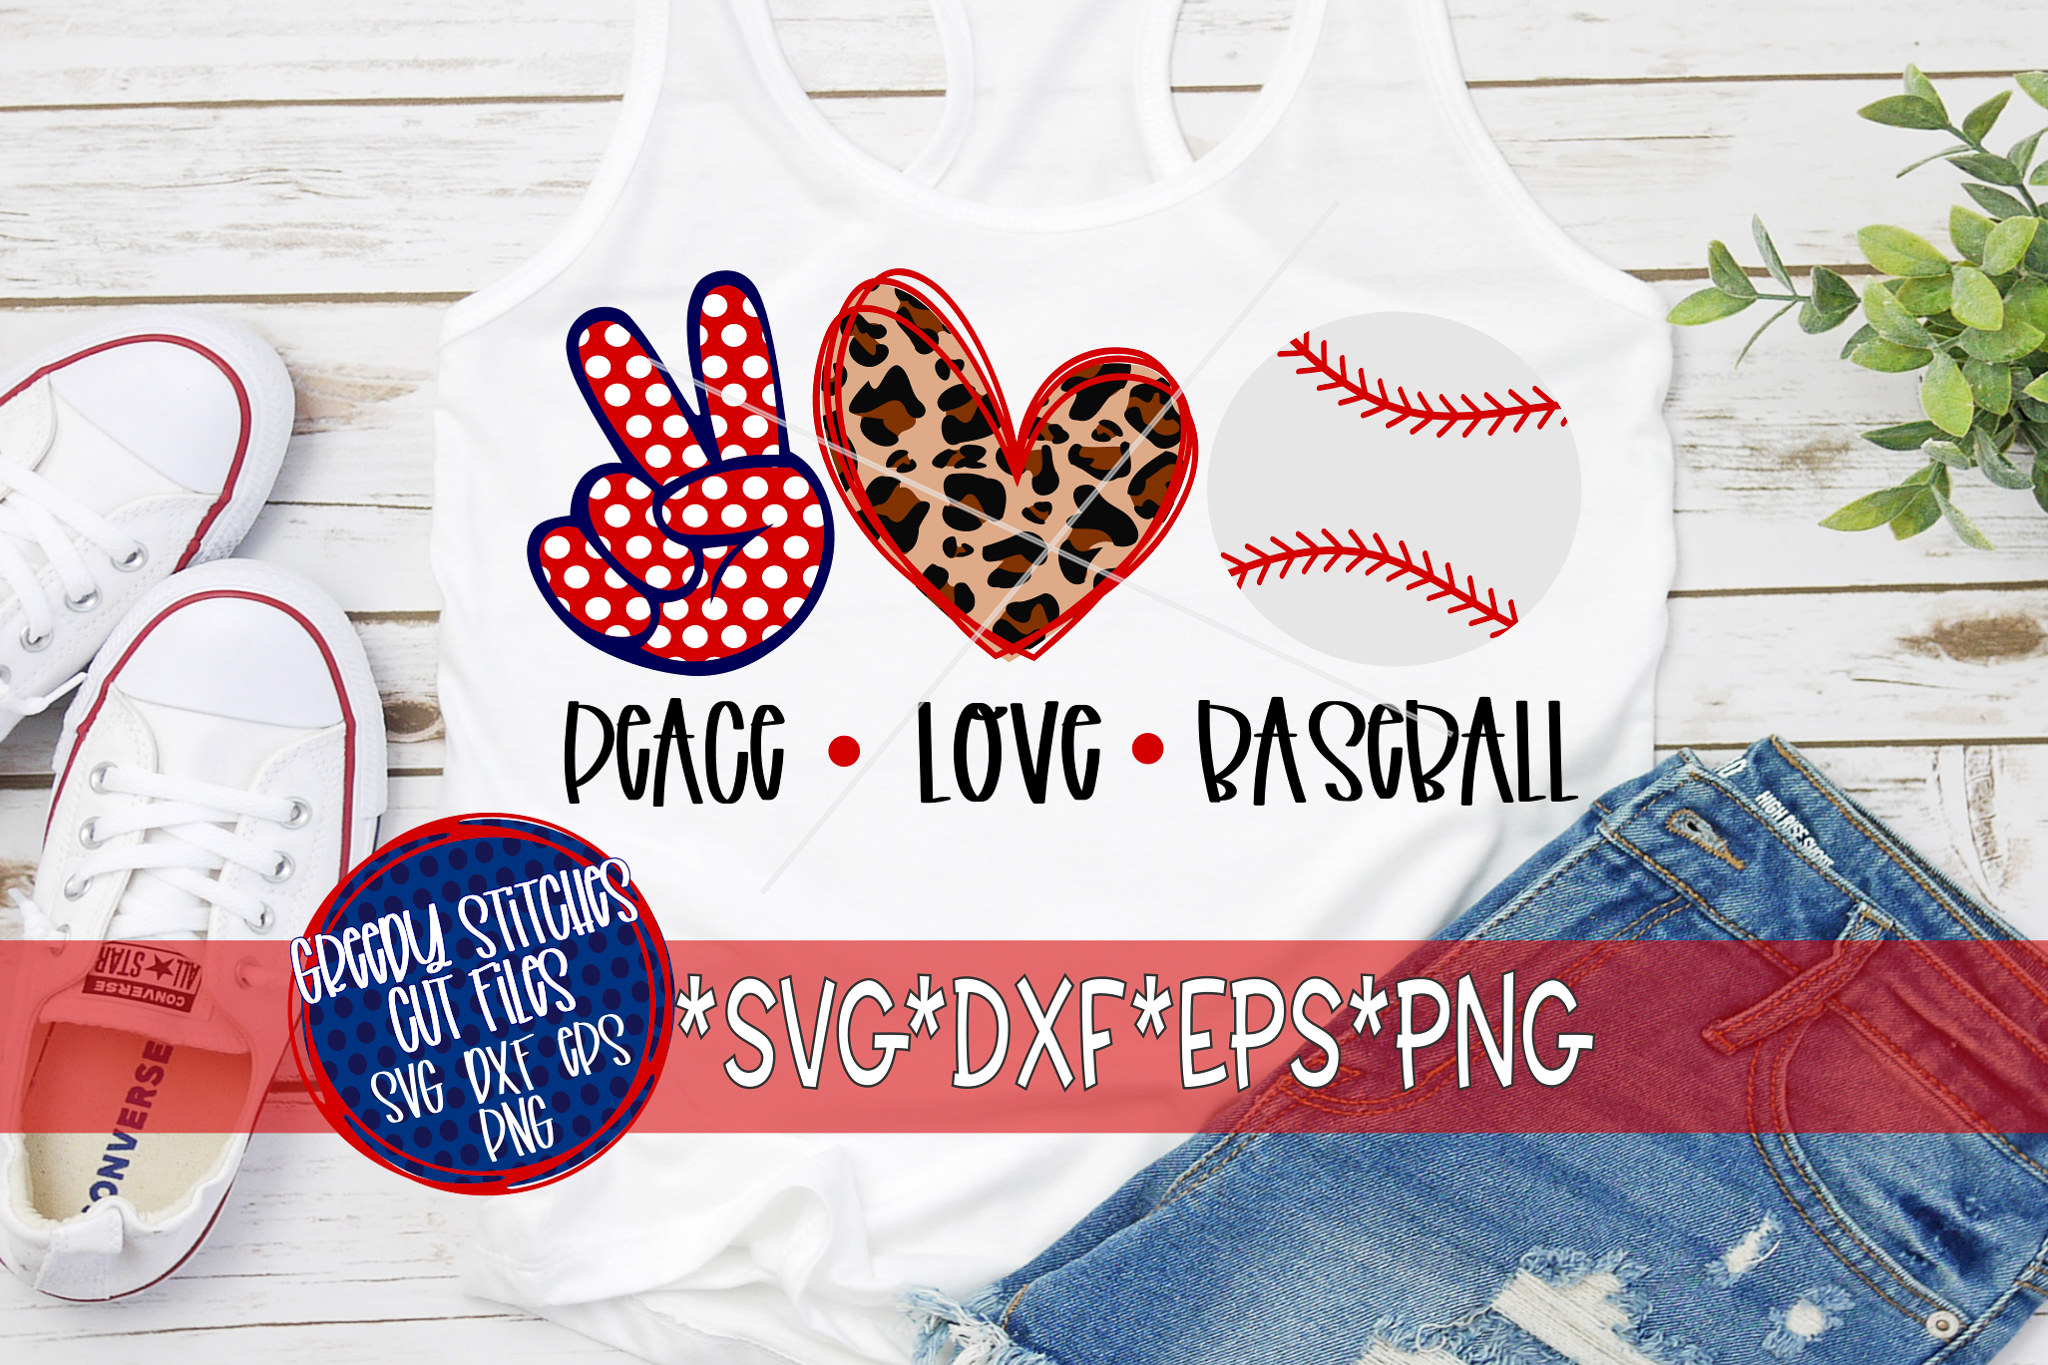 Download Peace Love Baseball SVG, DXF, EPS, PNG Files